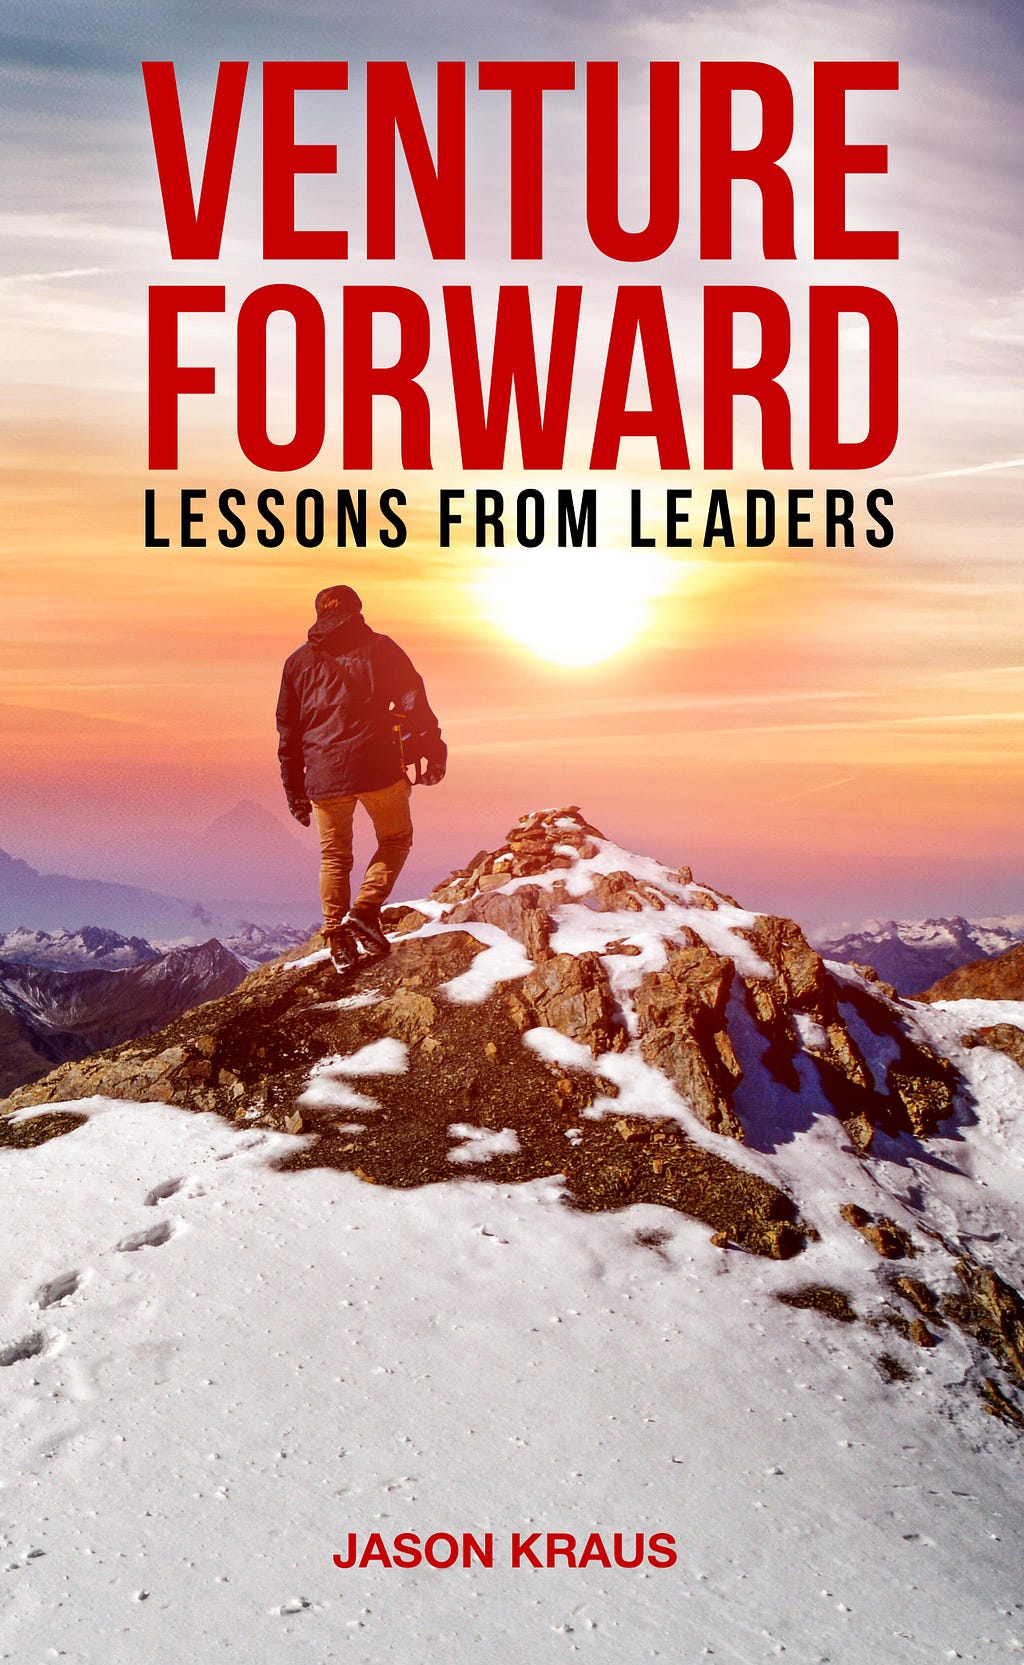 Venture Forward: Lessons from Leaders by Jason Kraus